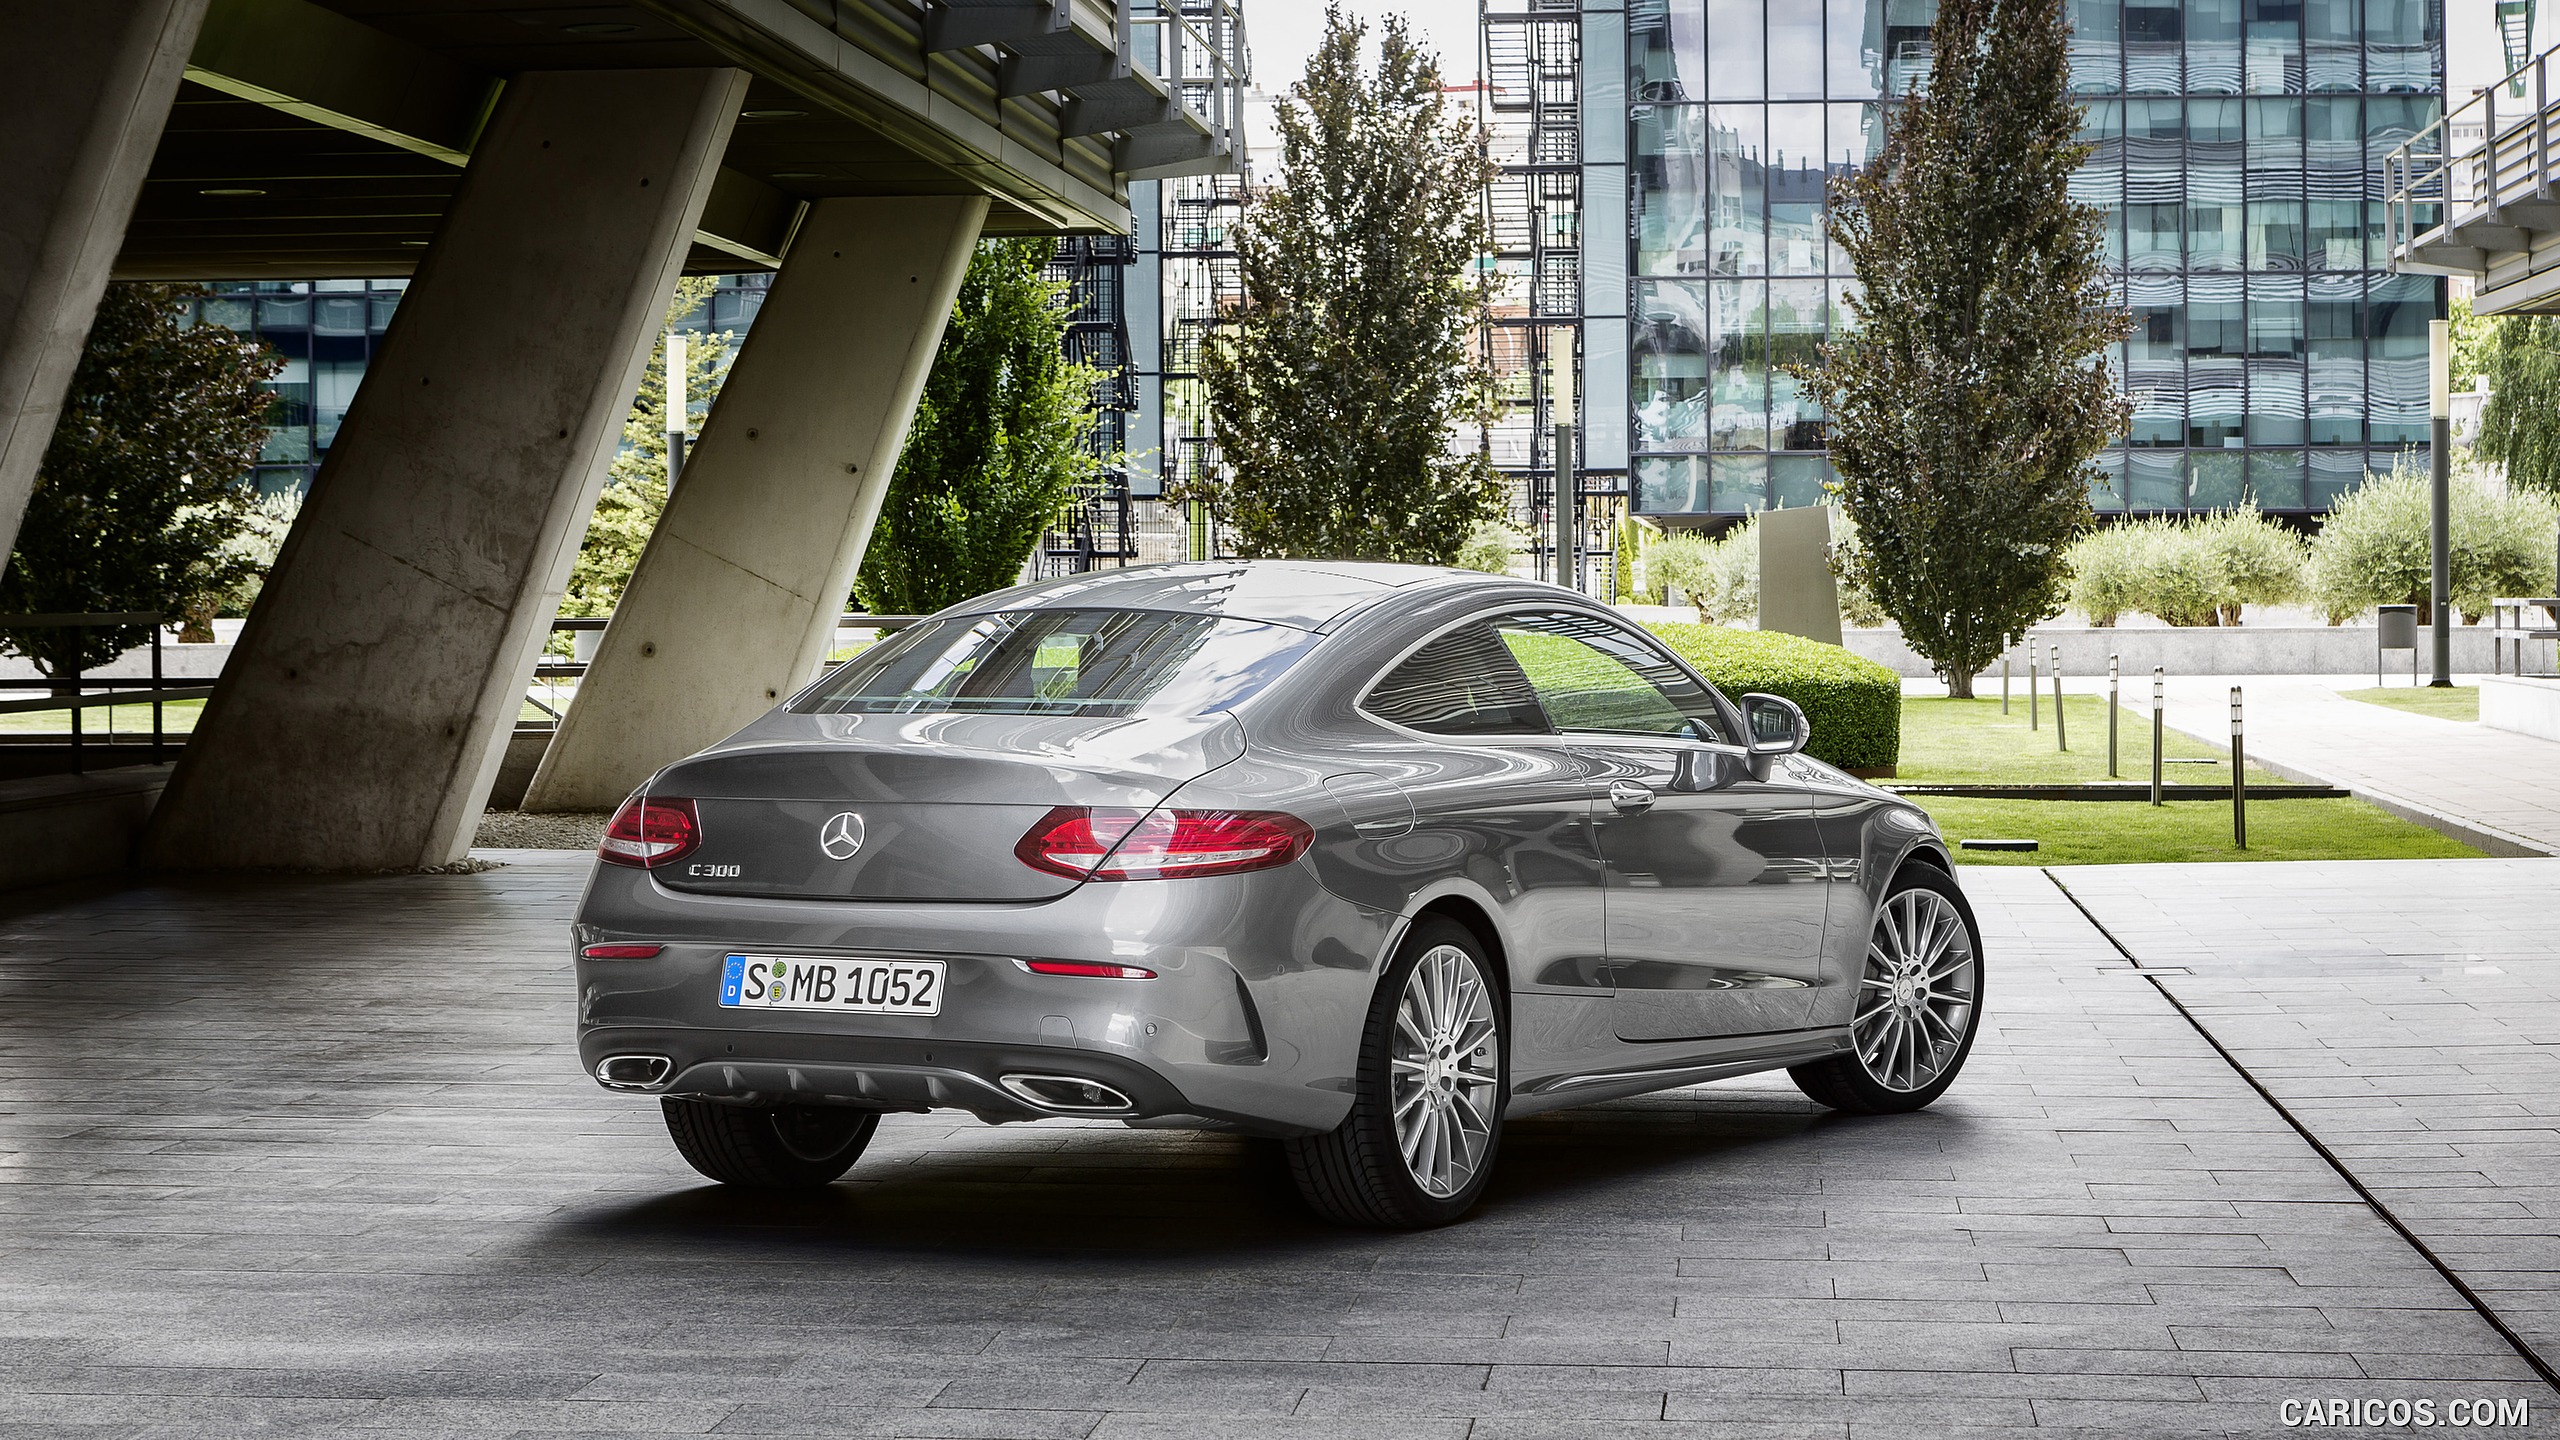 2017 Mercedes-Benz C-Class Coupe C300 (Selenit Grey) - Rear, #54 of 210